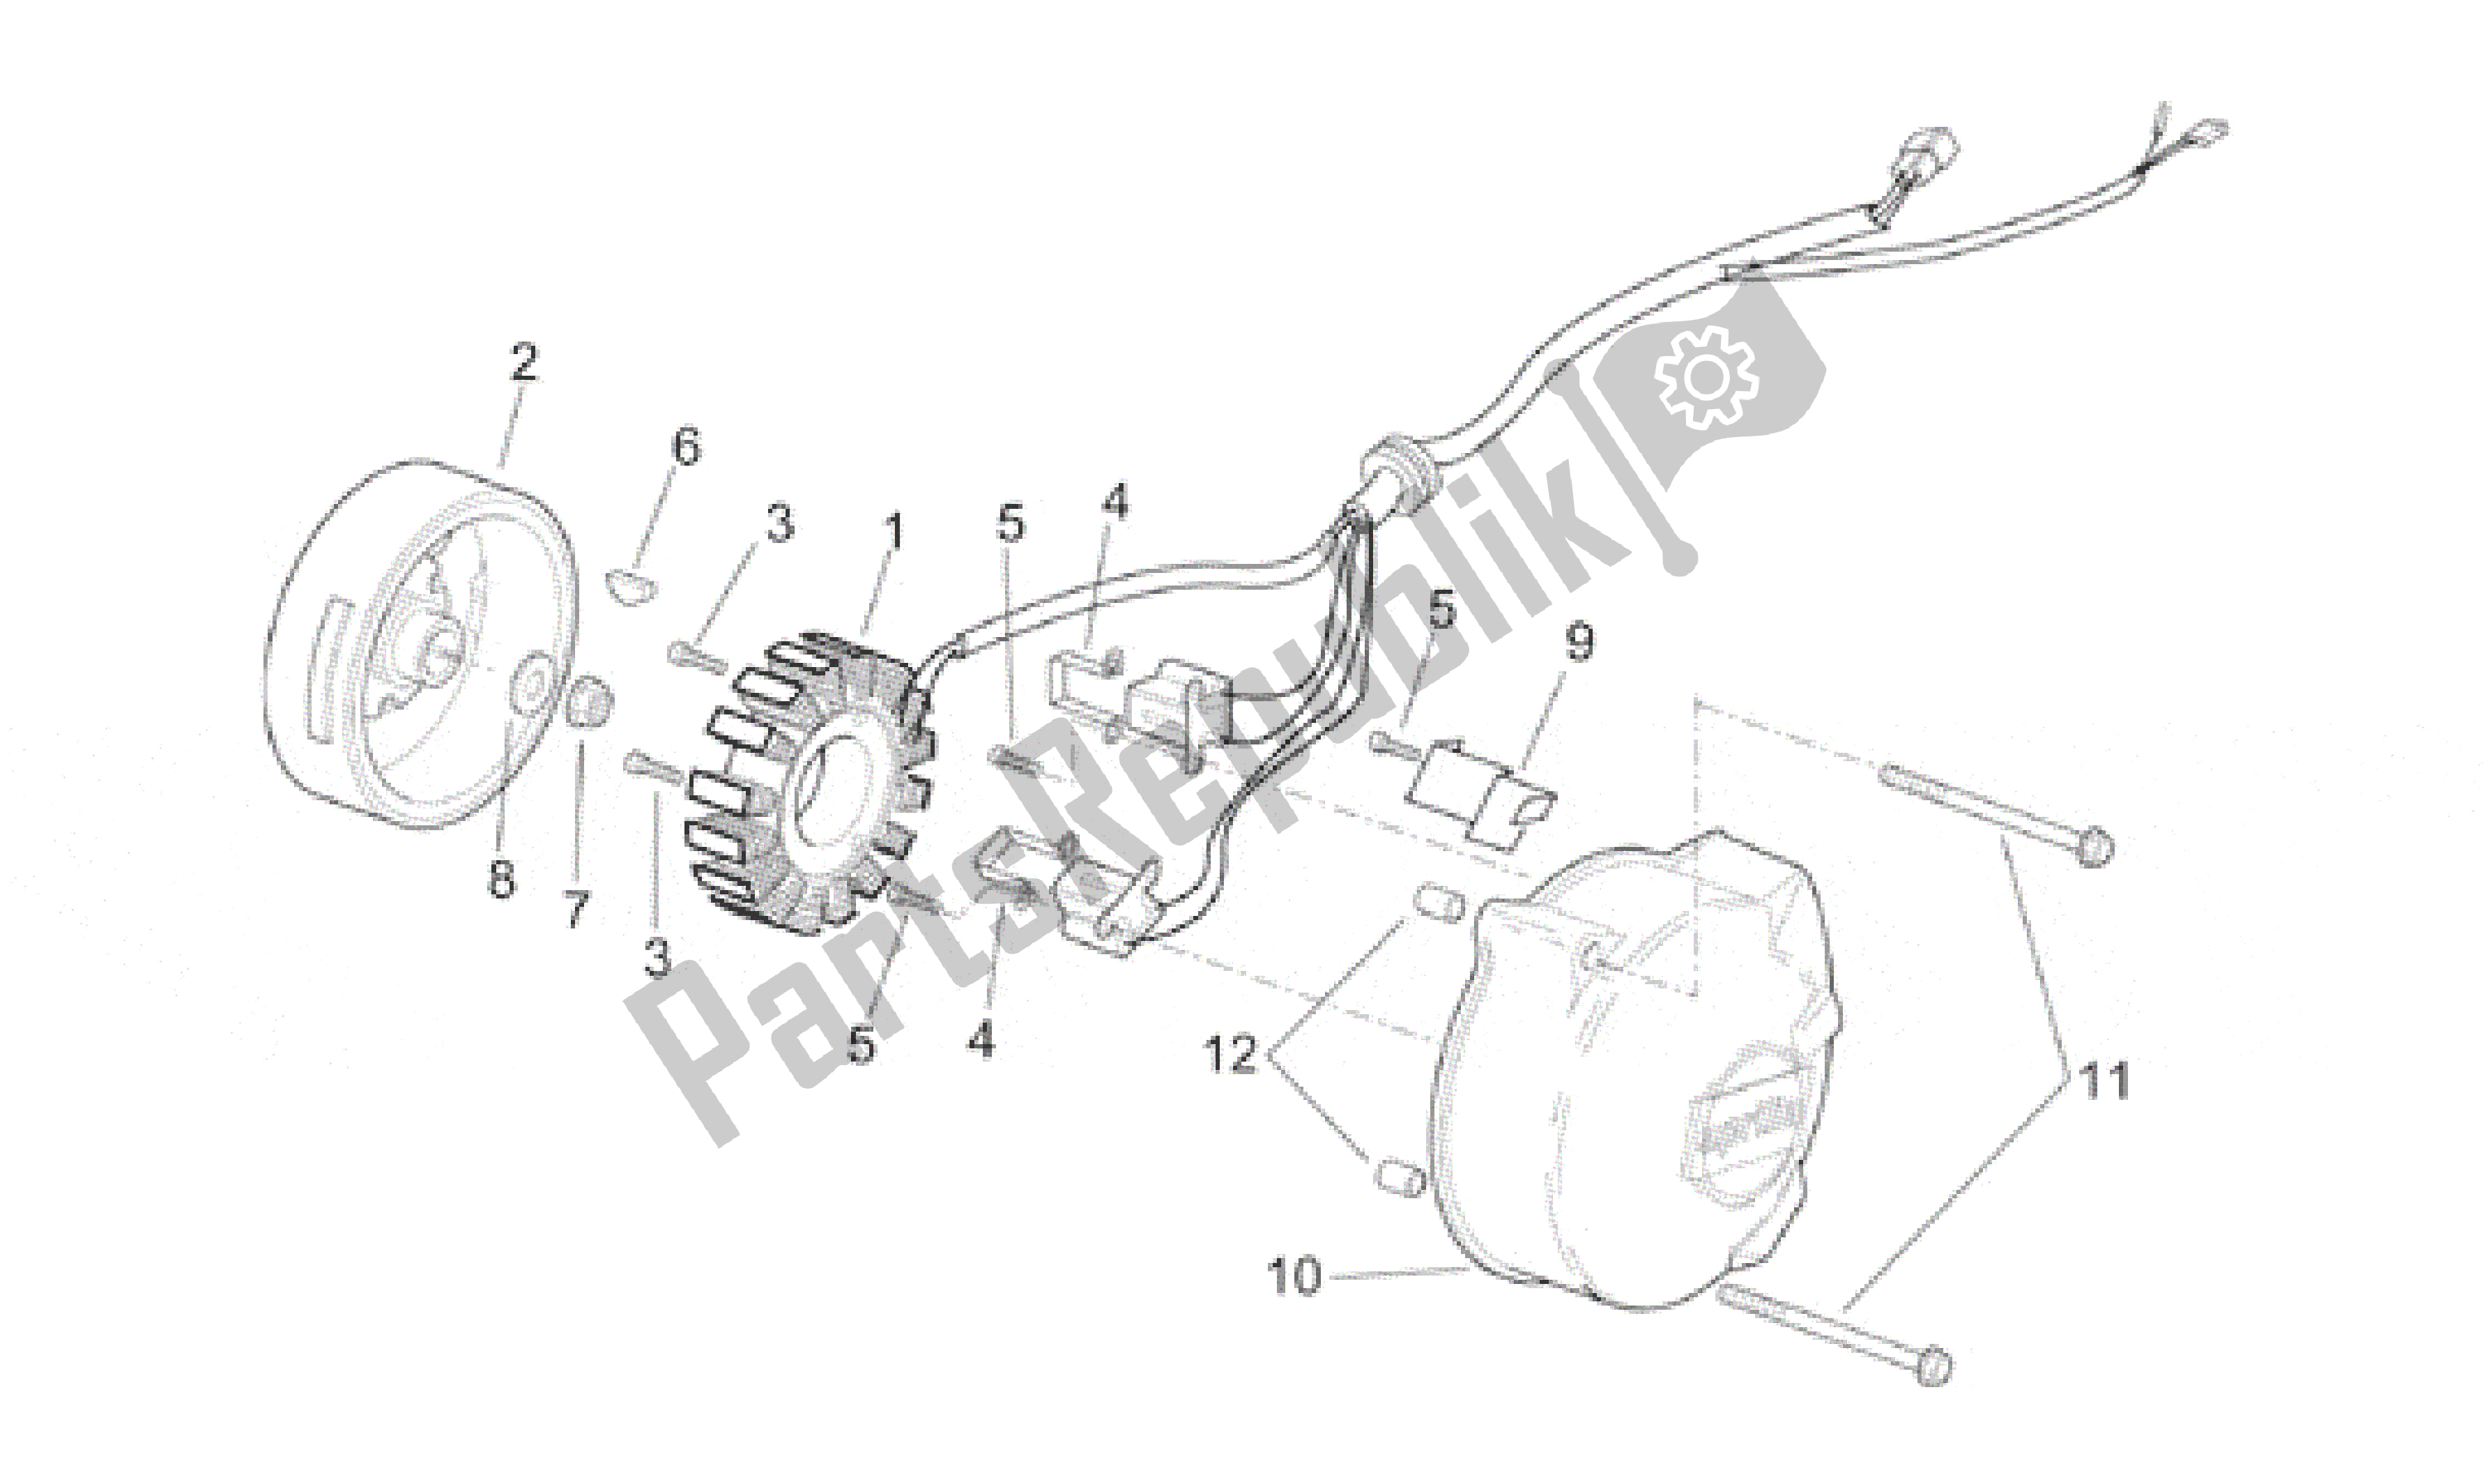 All parts for the Ignition Unit of the Aprilia RS 250 1998 - 2001